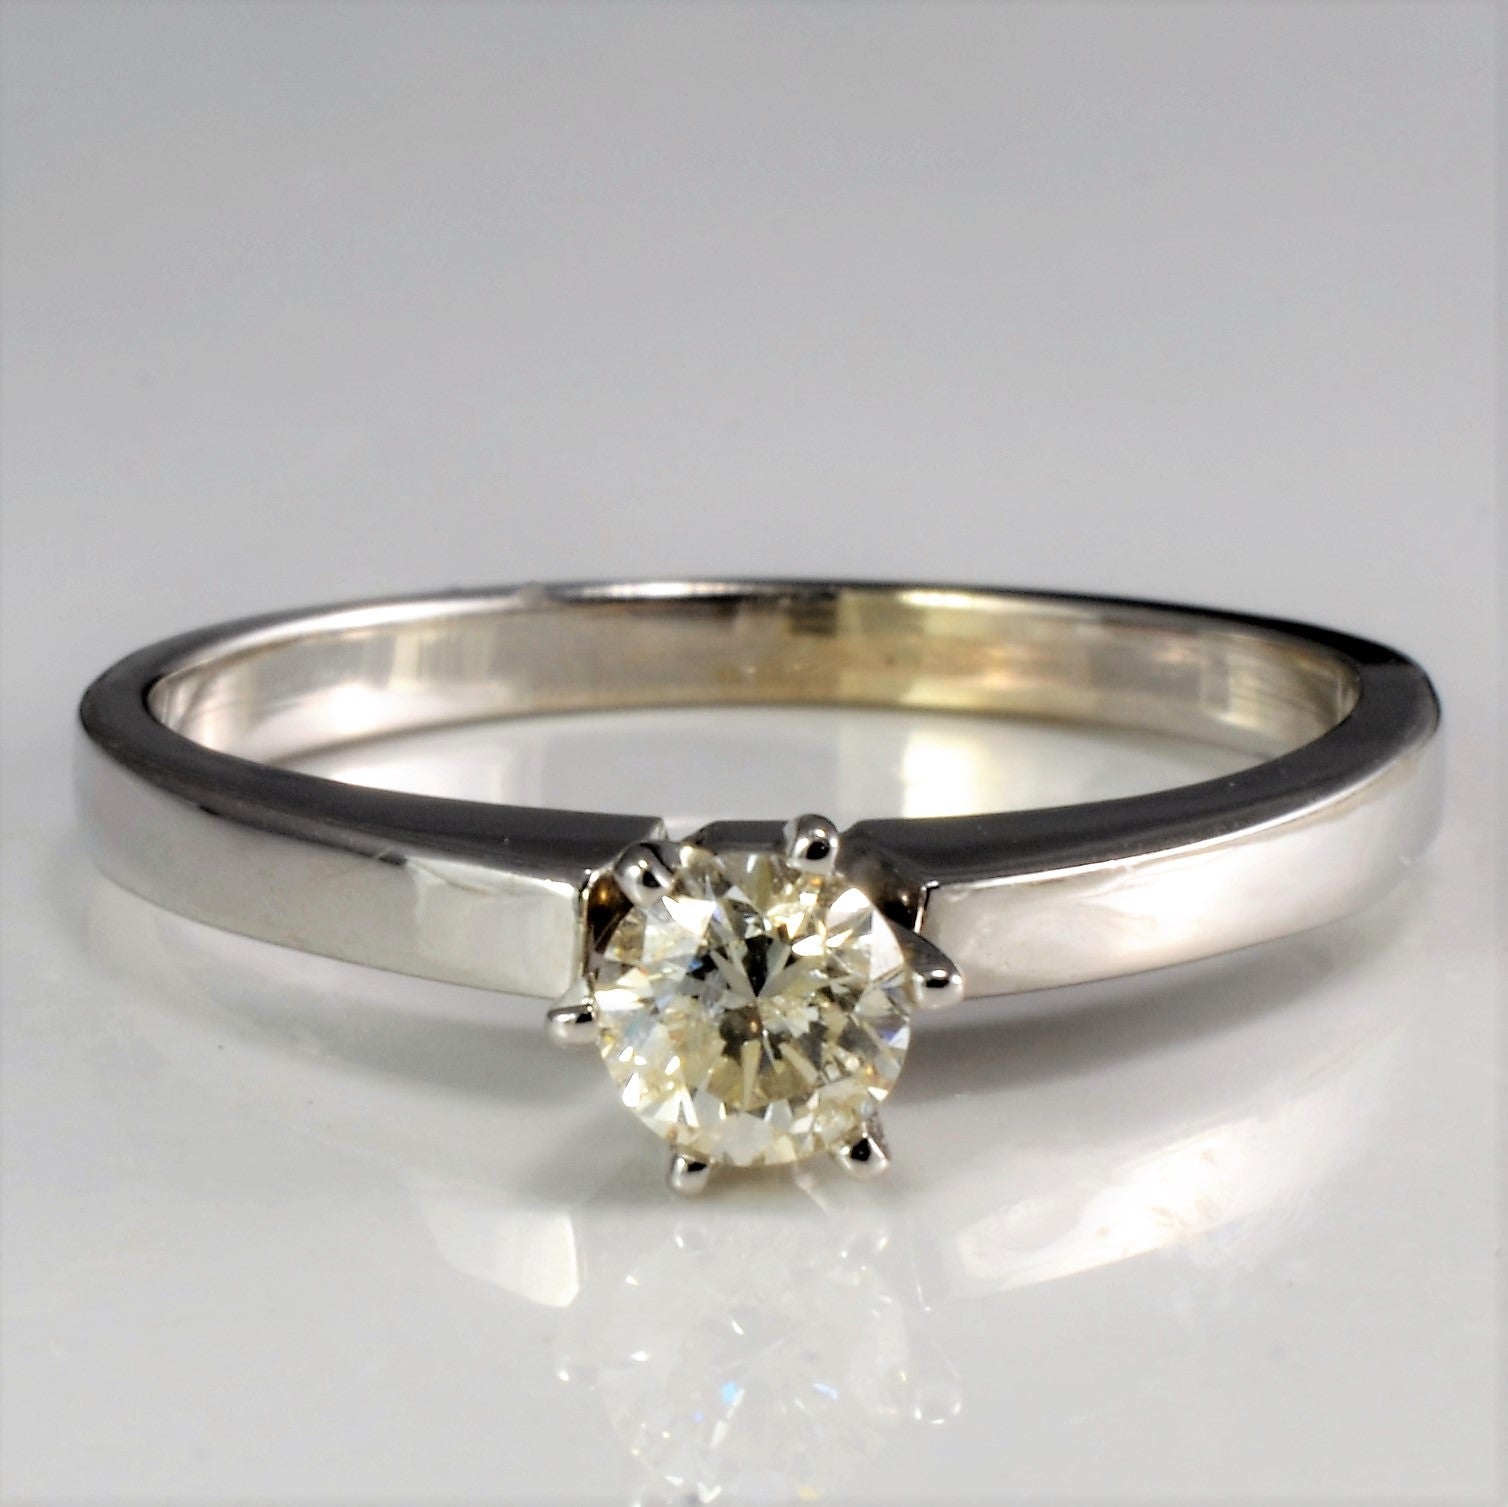 Six Prong Solitaire Diamond Ring | 0.25 ct, SZ 7.25 |